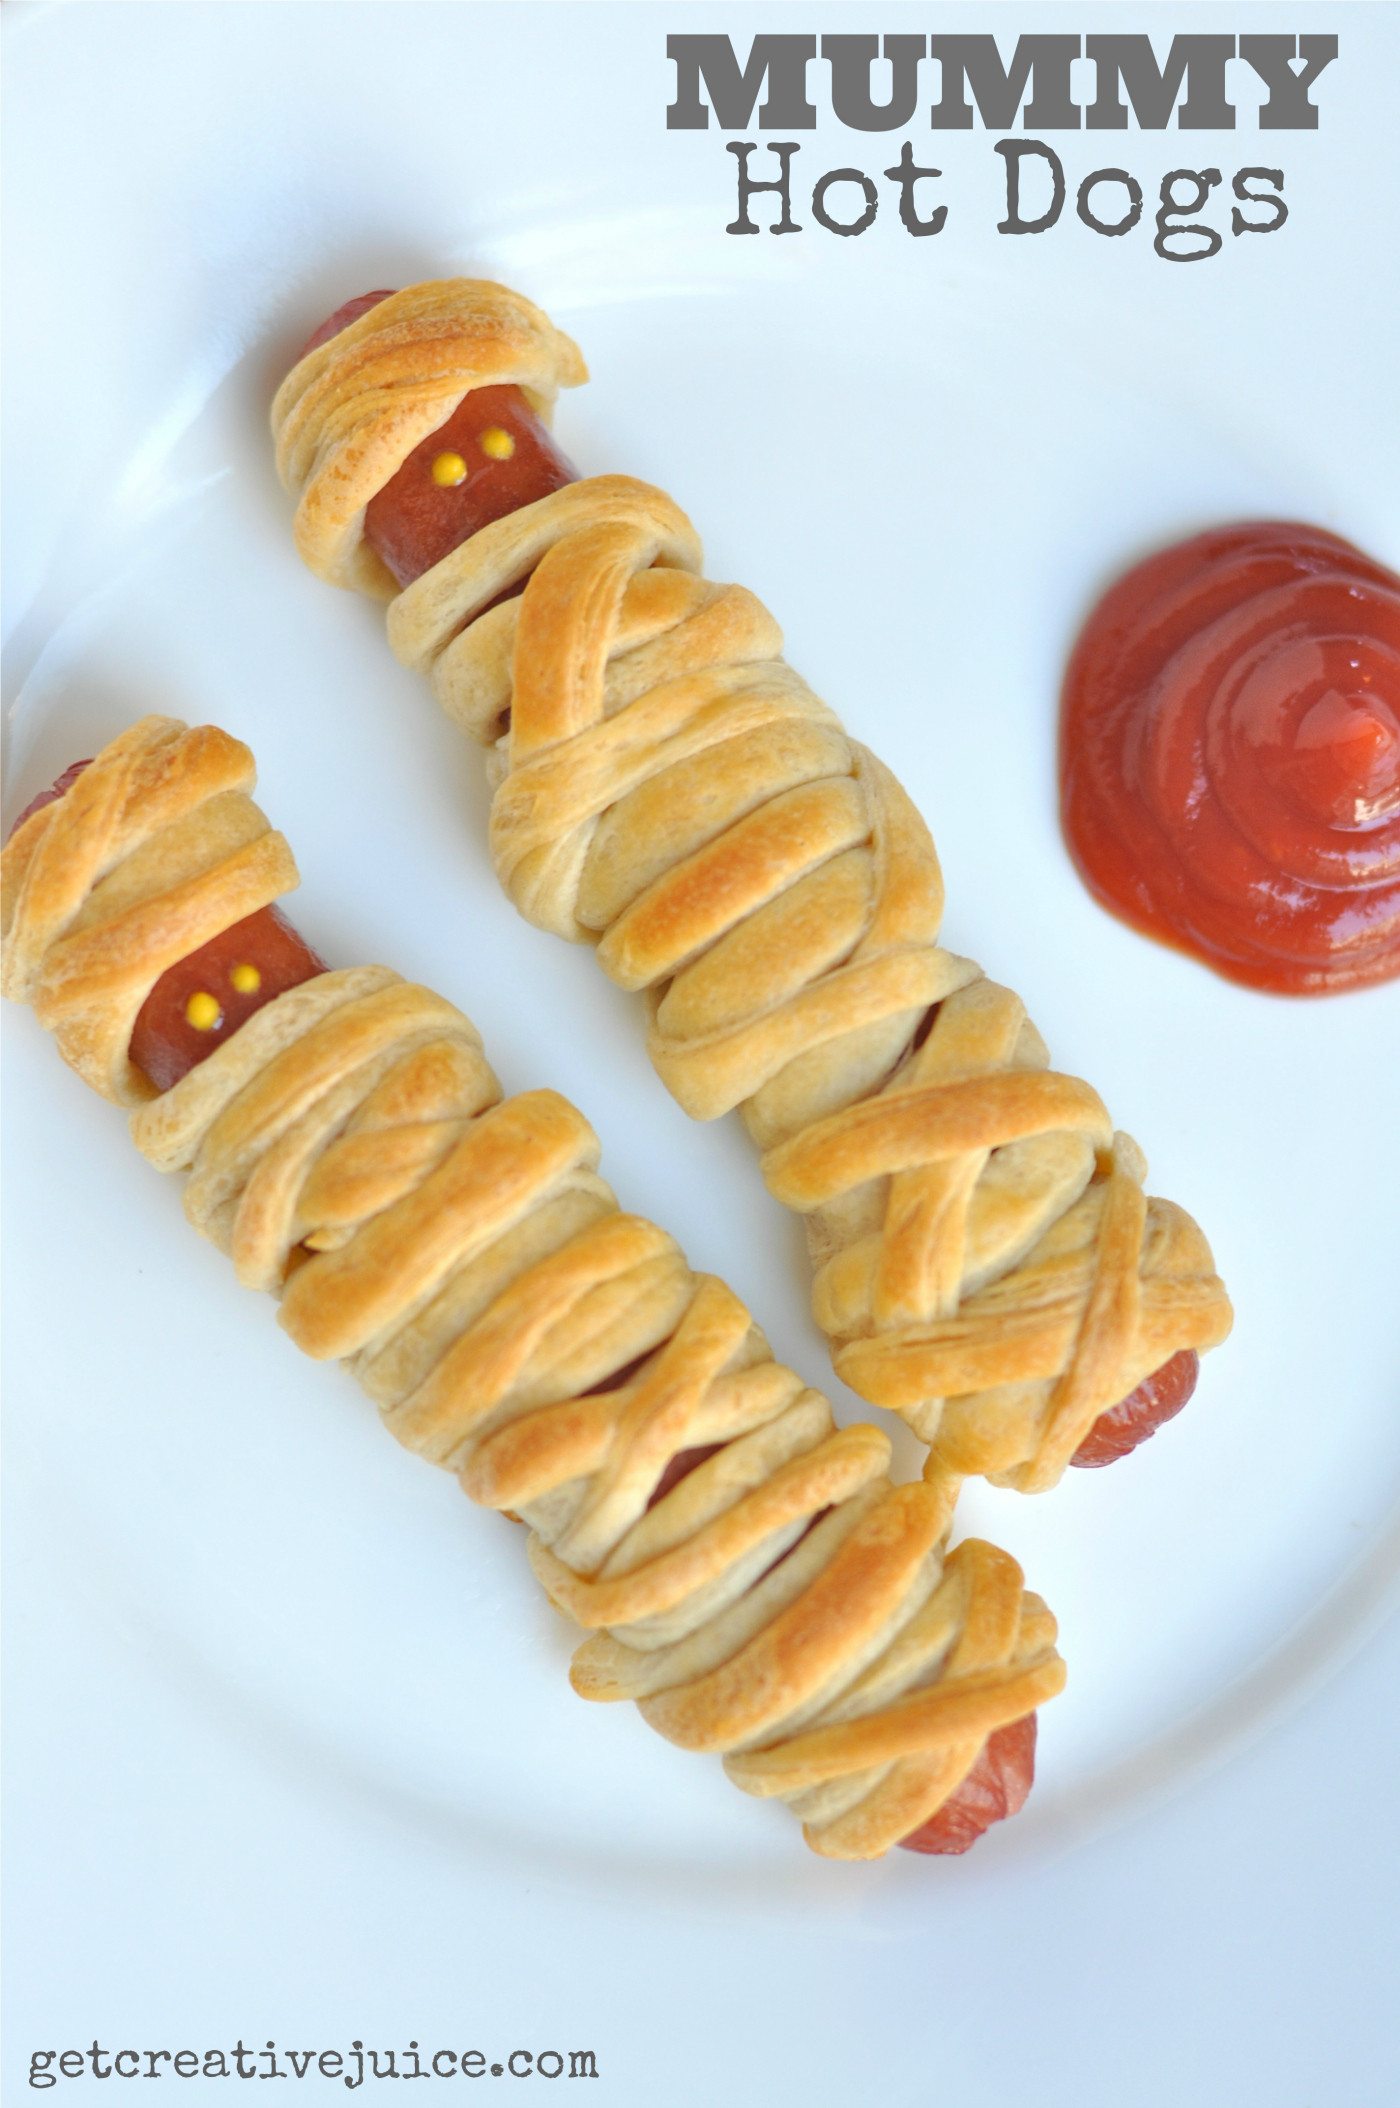 Halloween Hot Dogs
 Easy Halloween Mummy Hot Dogs for Kids